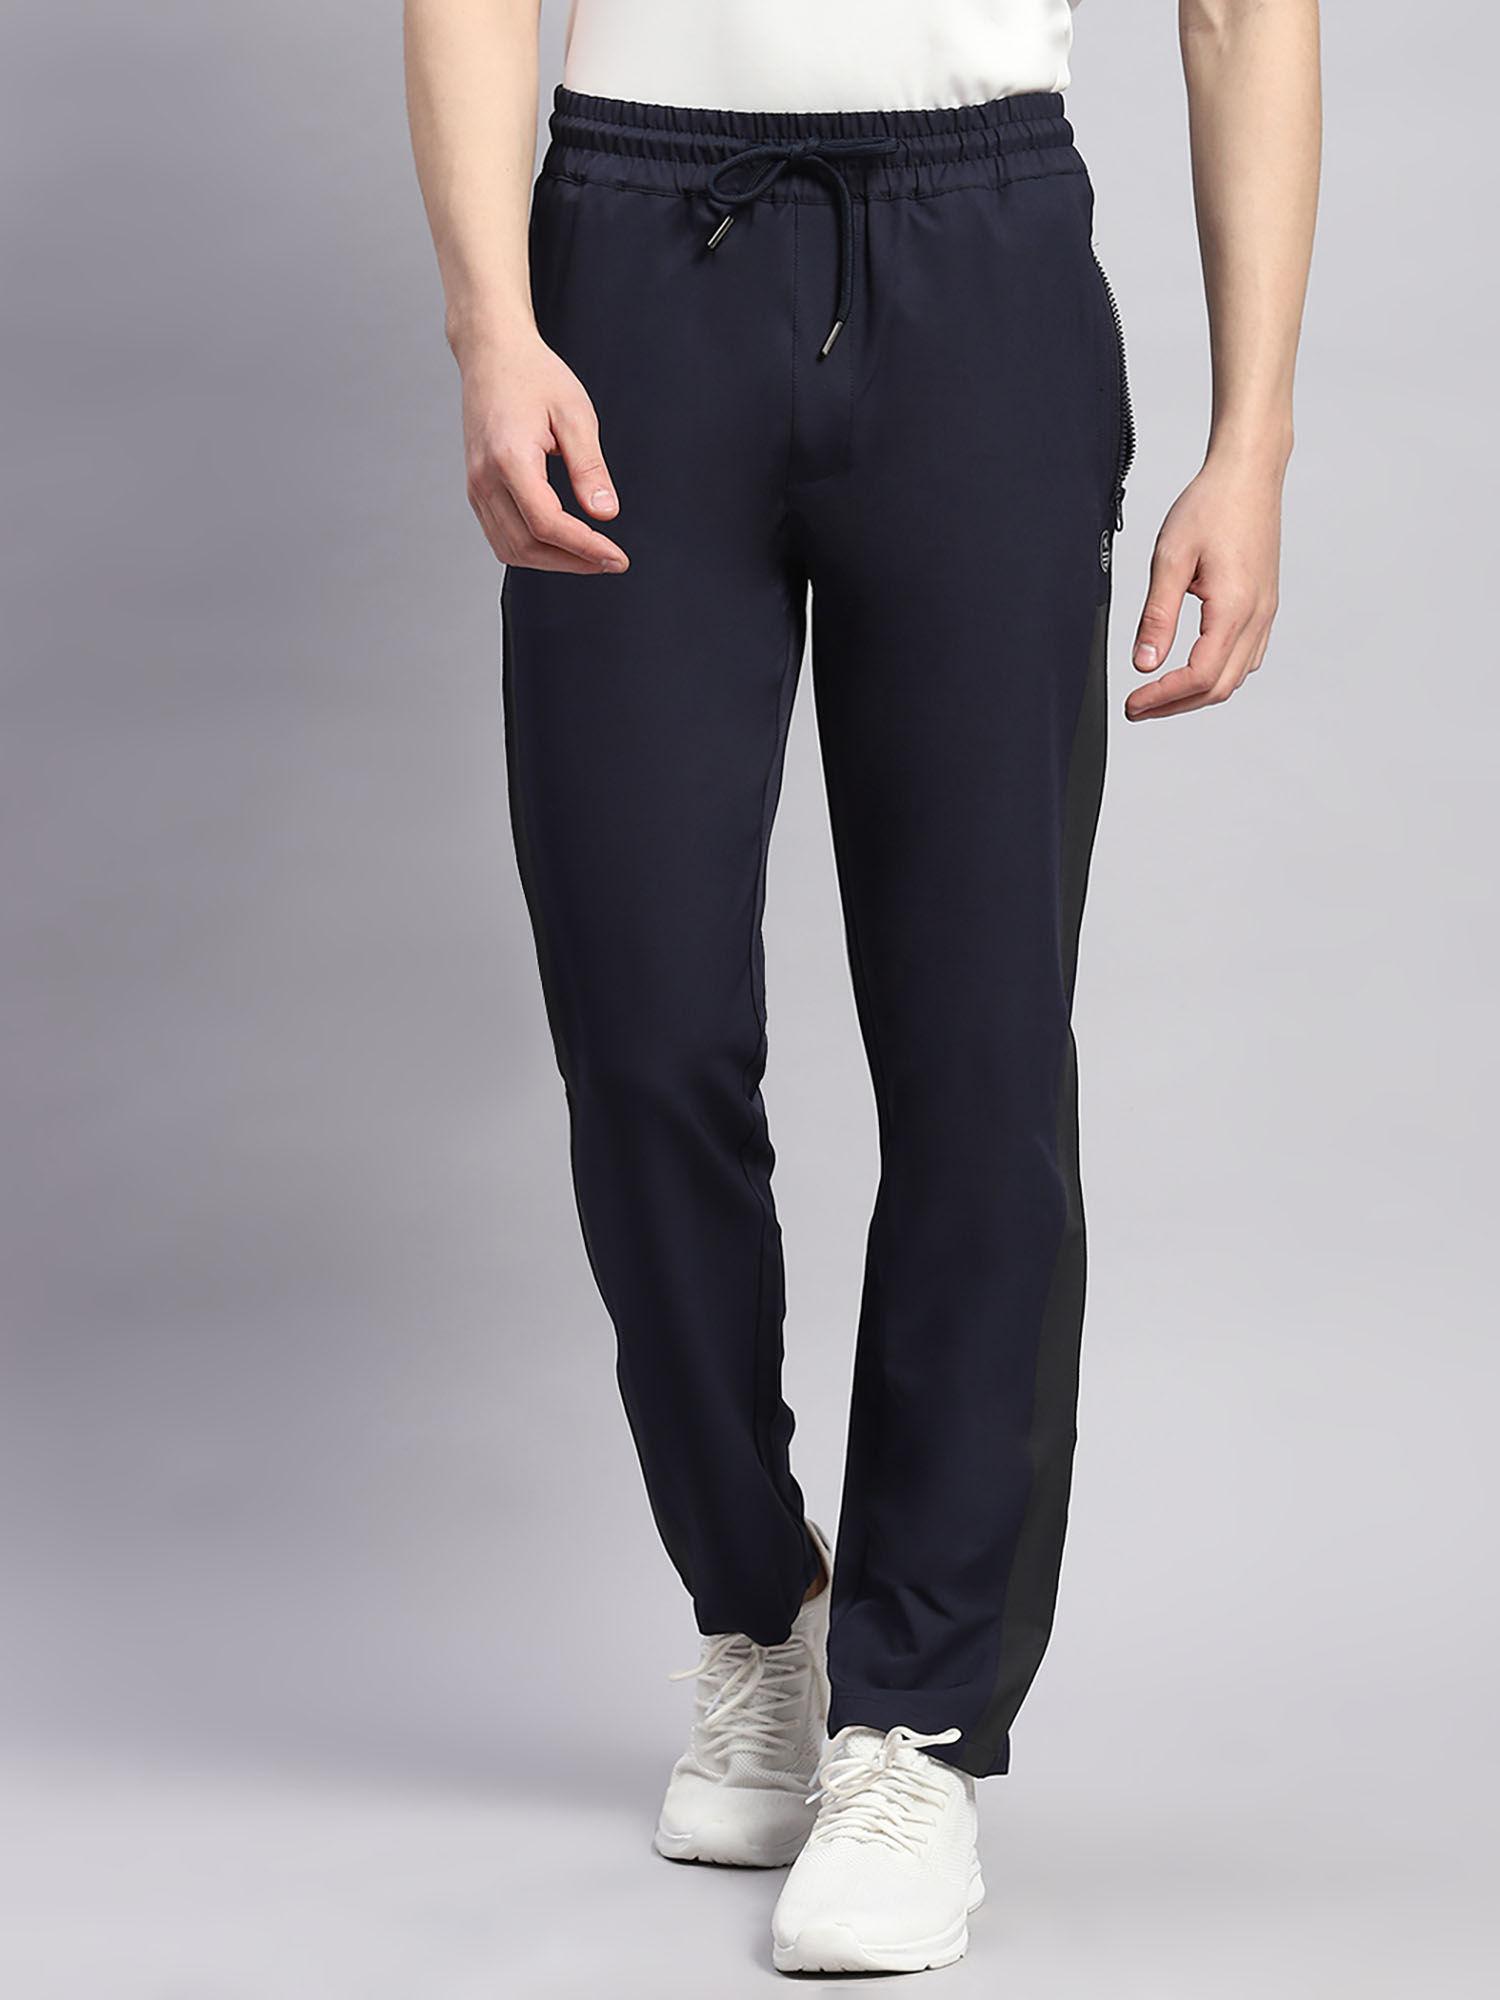 mens-navy-blue-solid-polyester-blend-trackpant